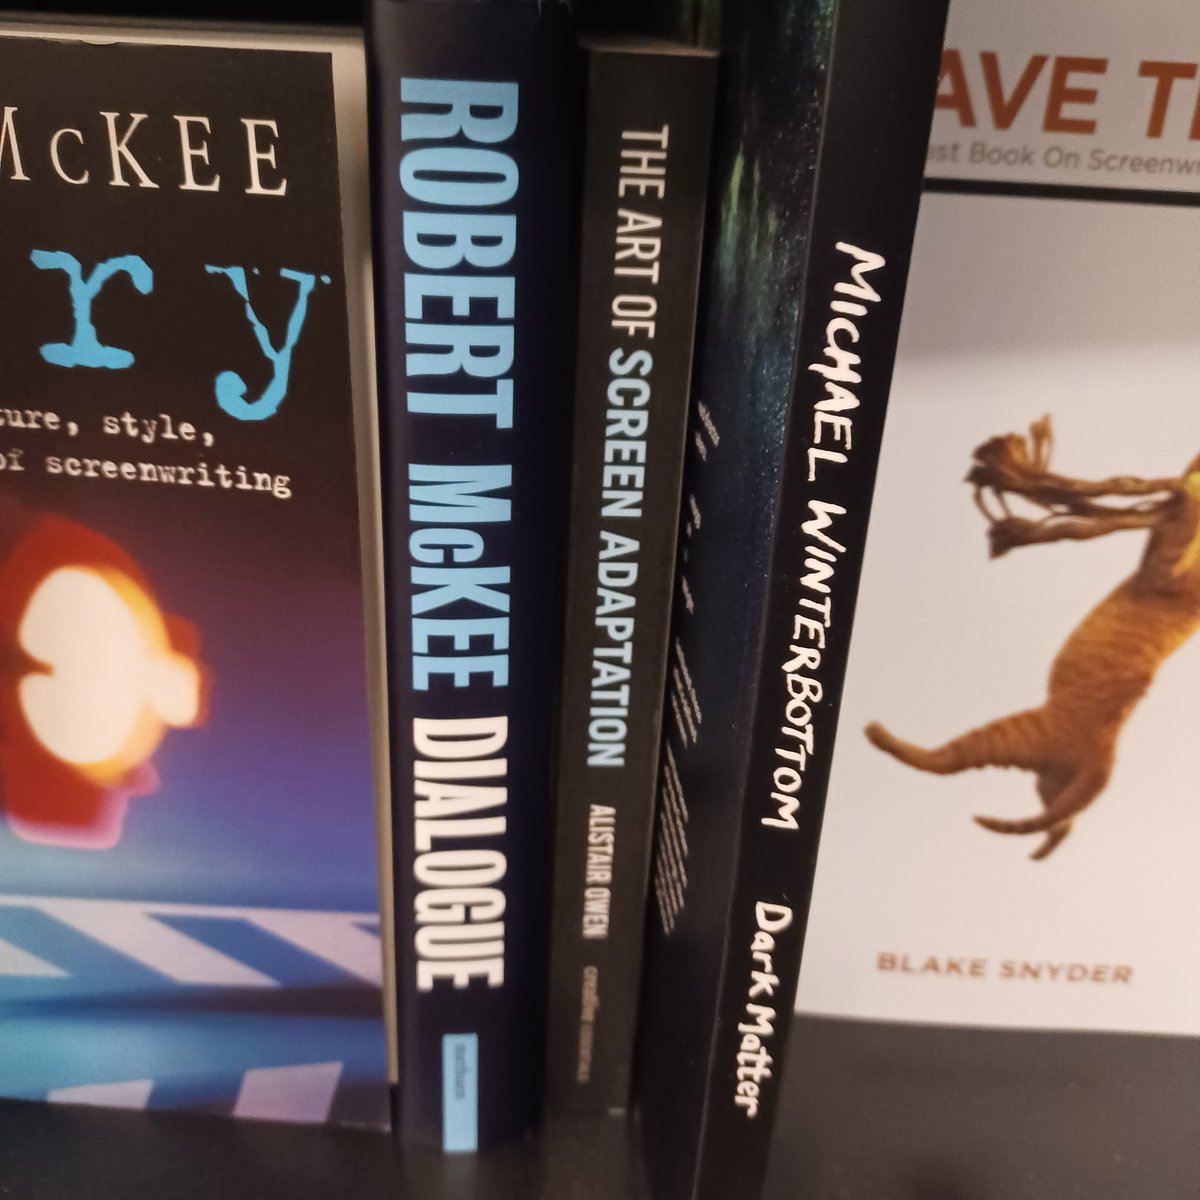 Welcome sighting of #TheArtOfScreenAdaptation, shoulder to shoulder with Robert McKee and Michael Winterbottom @Waterstones Piccadilly.